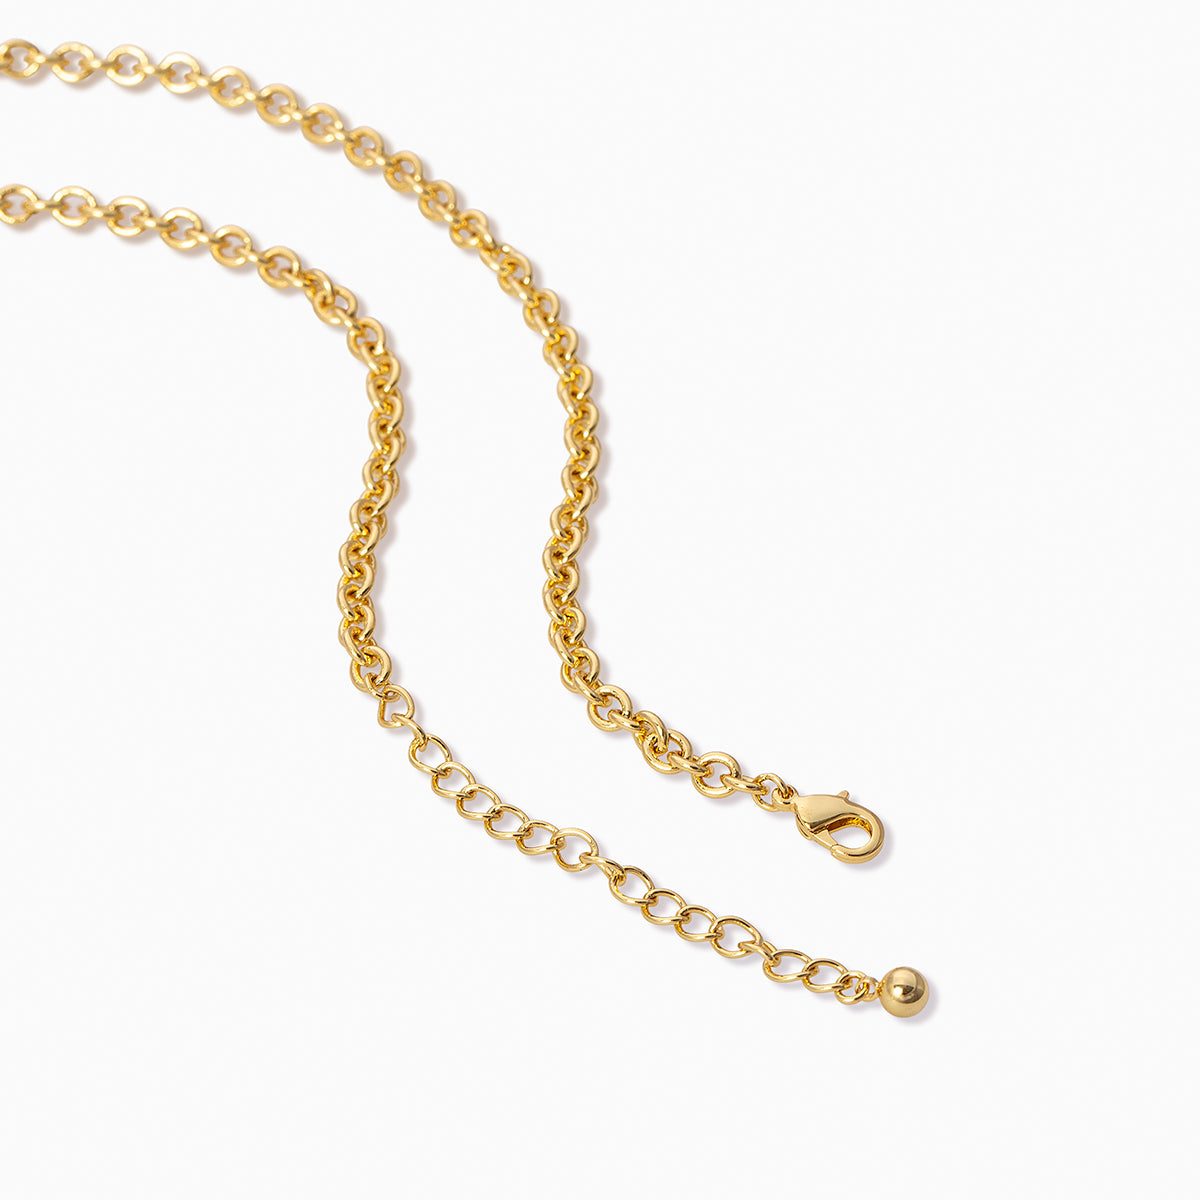 Know Me Necklace | Gold A Gold C Gold E Gold J Gold K Gold L Gold M Gold S Gold T | Product Detail Image 2 | Uncommon James